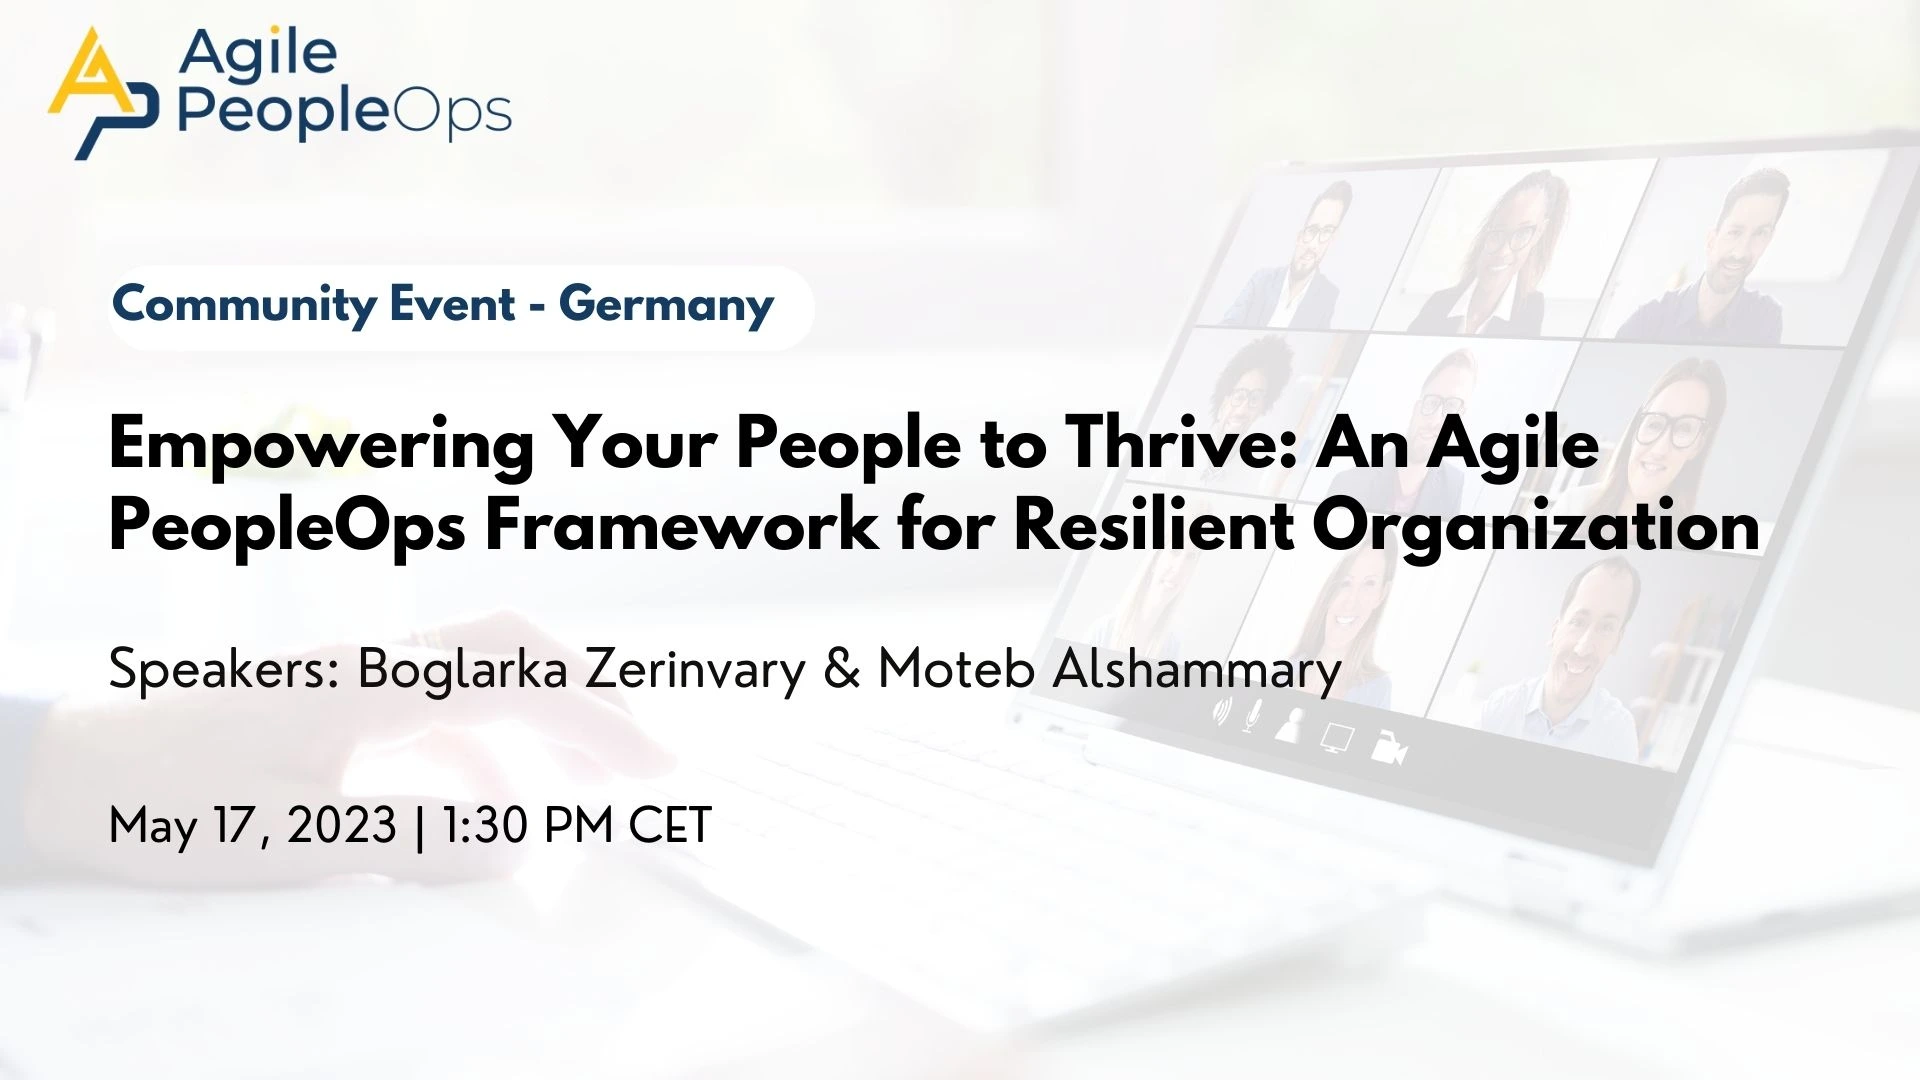 Empowering Your People to Thrive: An Agile PeopleOps Framework for Resilient Organization